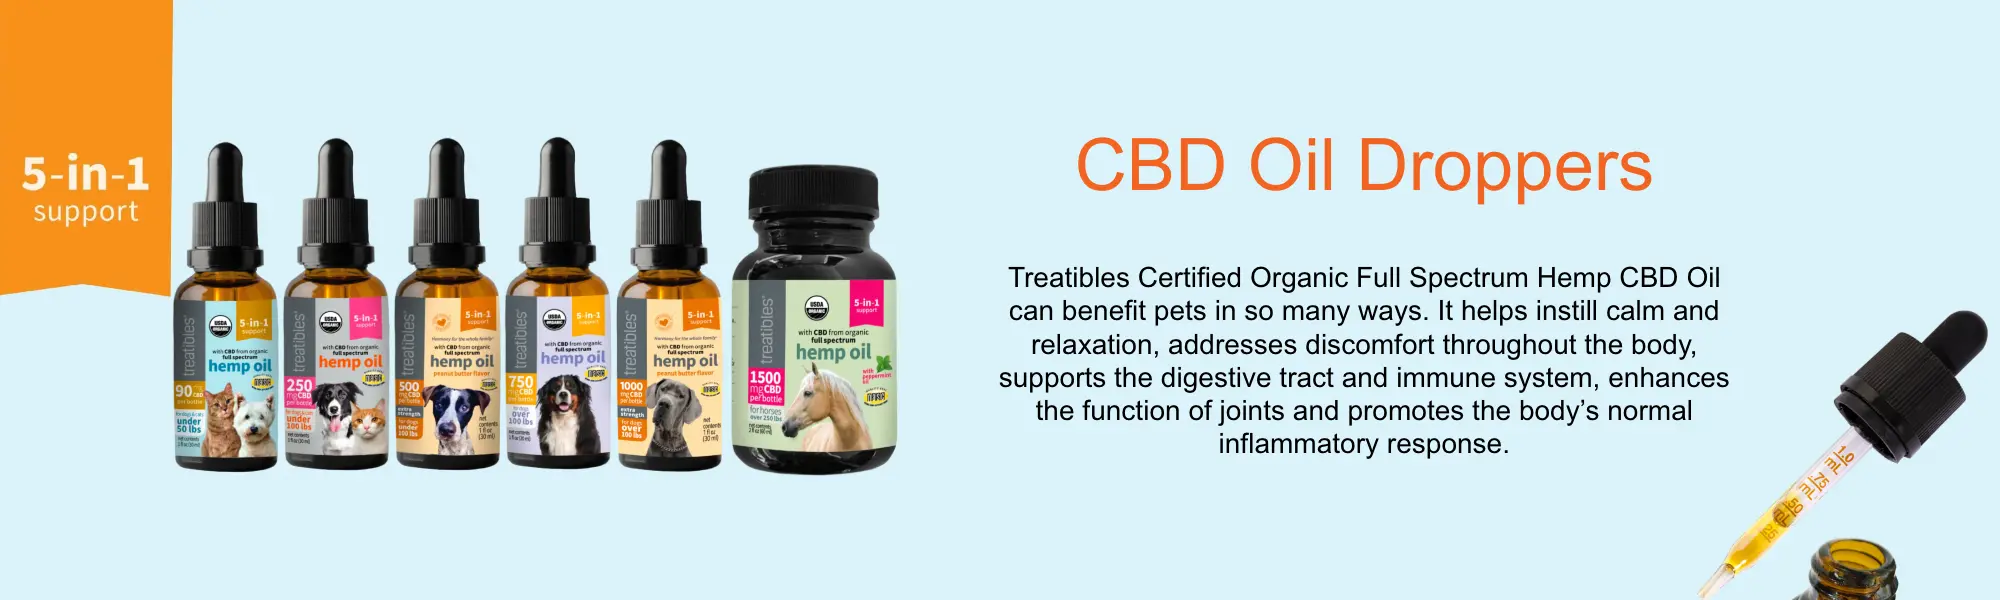 CBD Oil Droppers page banner